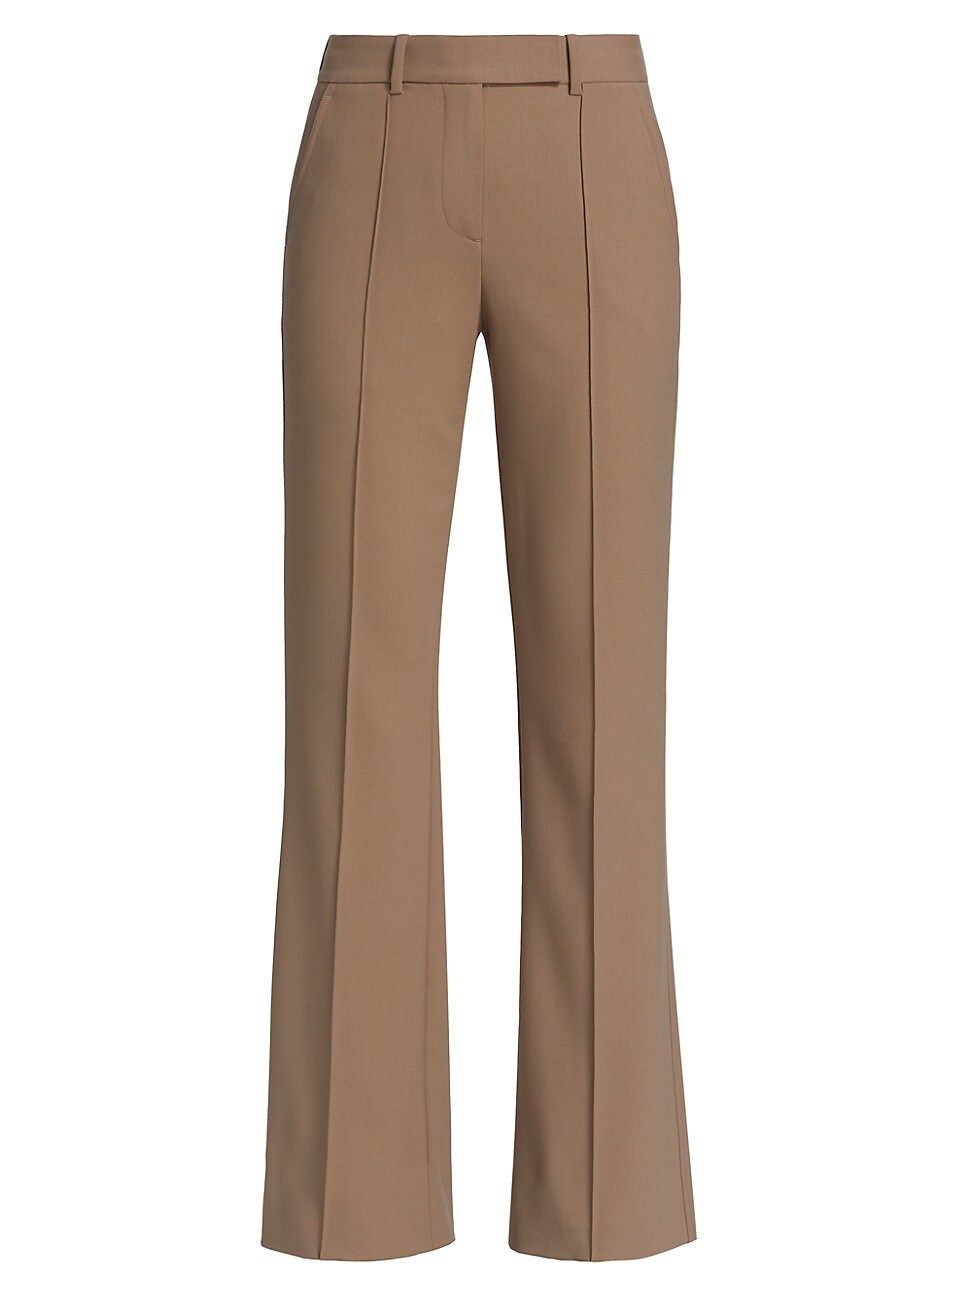 Women's High-Waisted Stretch Trousers - Taupe - Size 8 | Saks Fifth Avenue